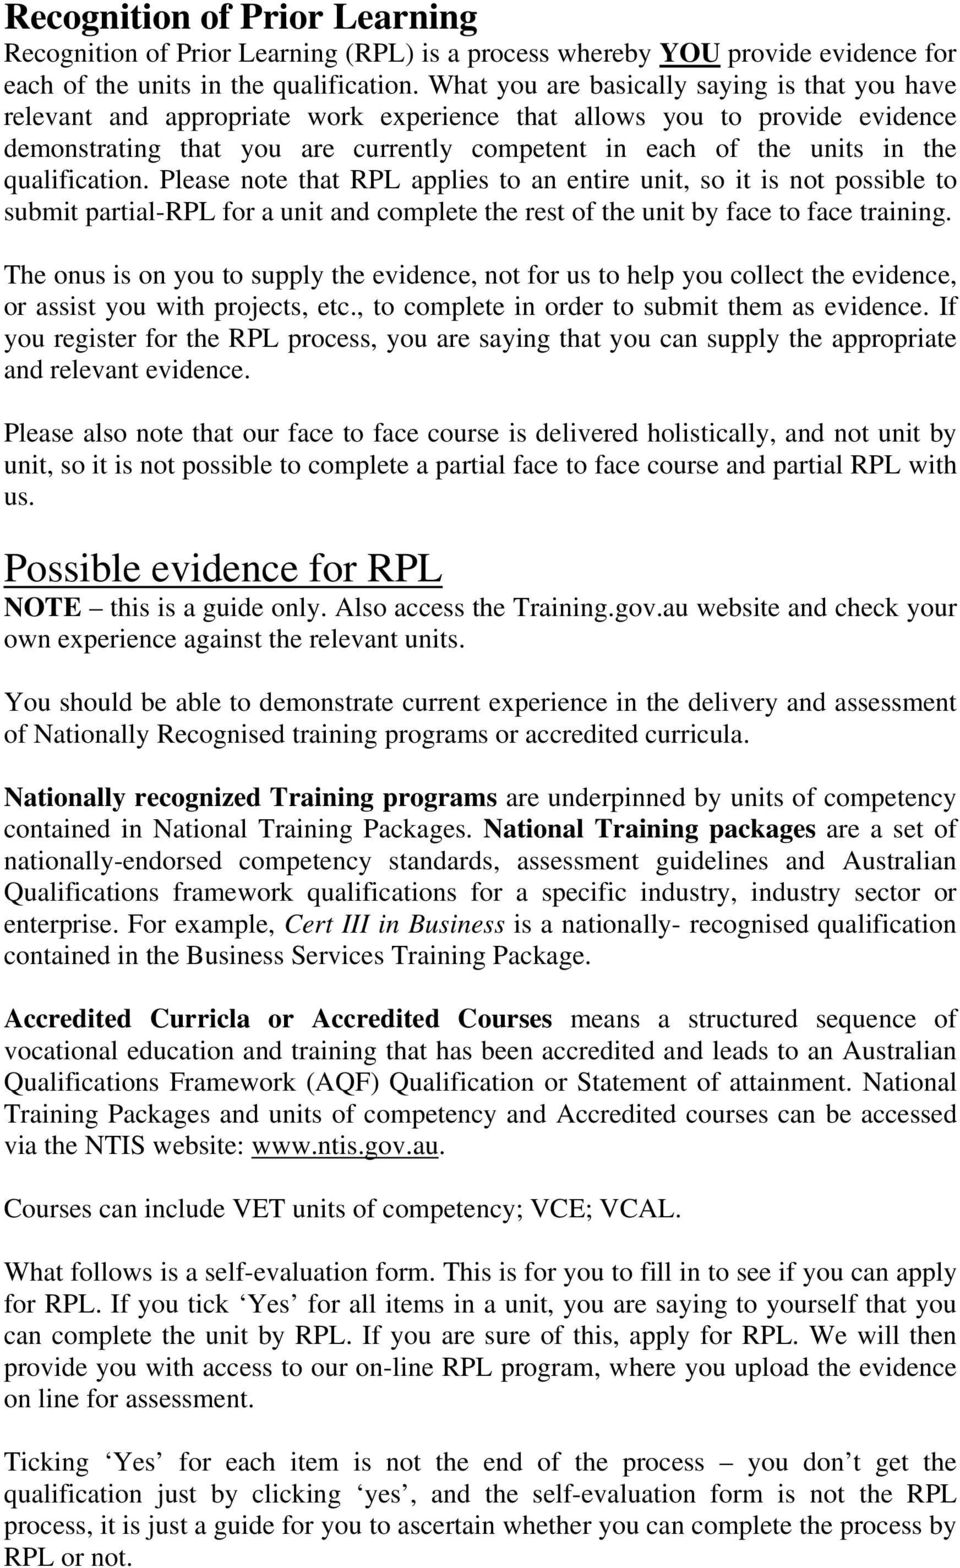 qualification. Please note that RPL applies to an entire unit, so it is not possible to submit partial-rpl for a unit and complete the rest of the unit by face to face training.